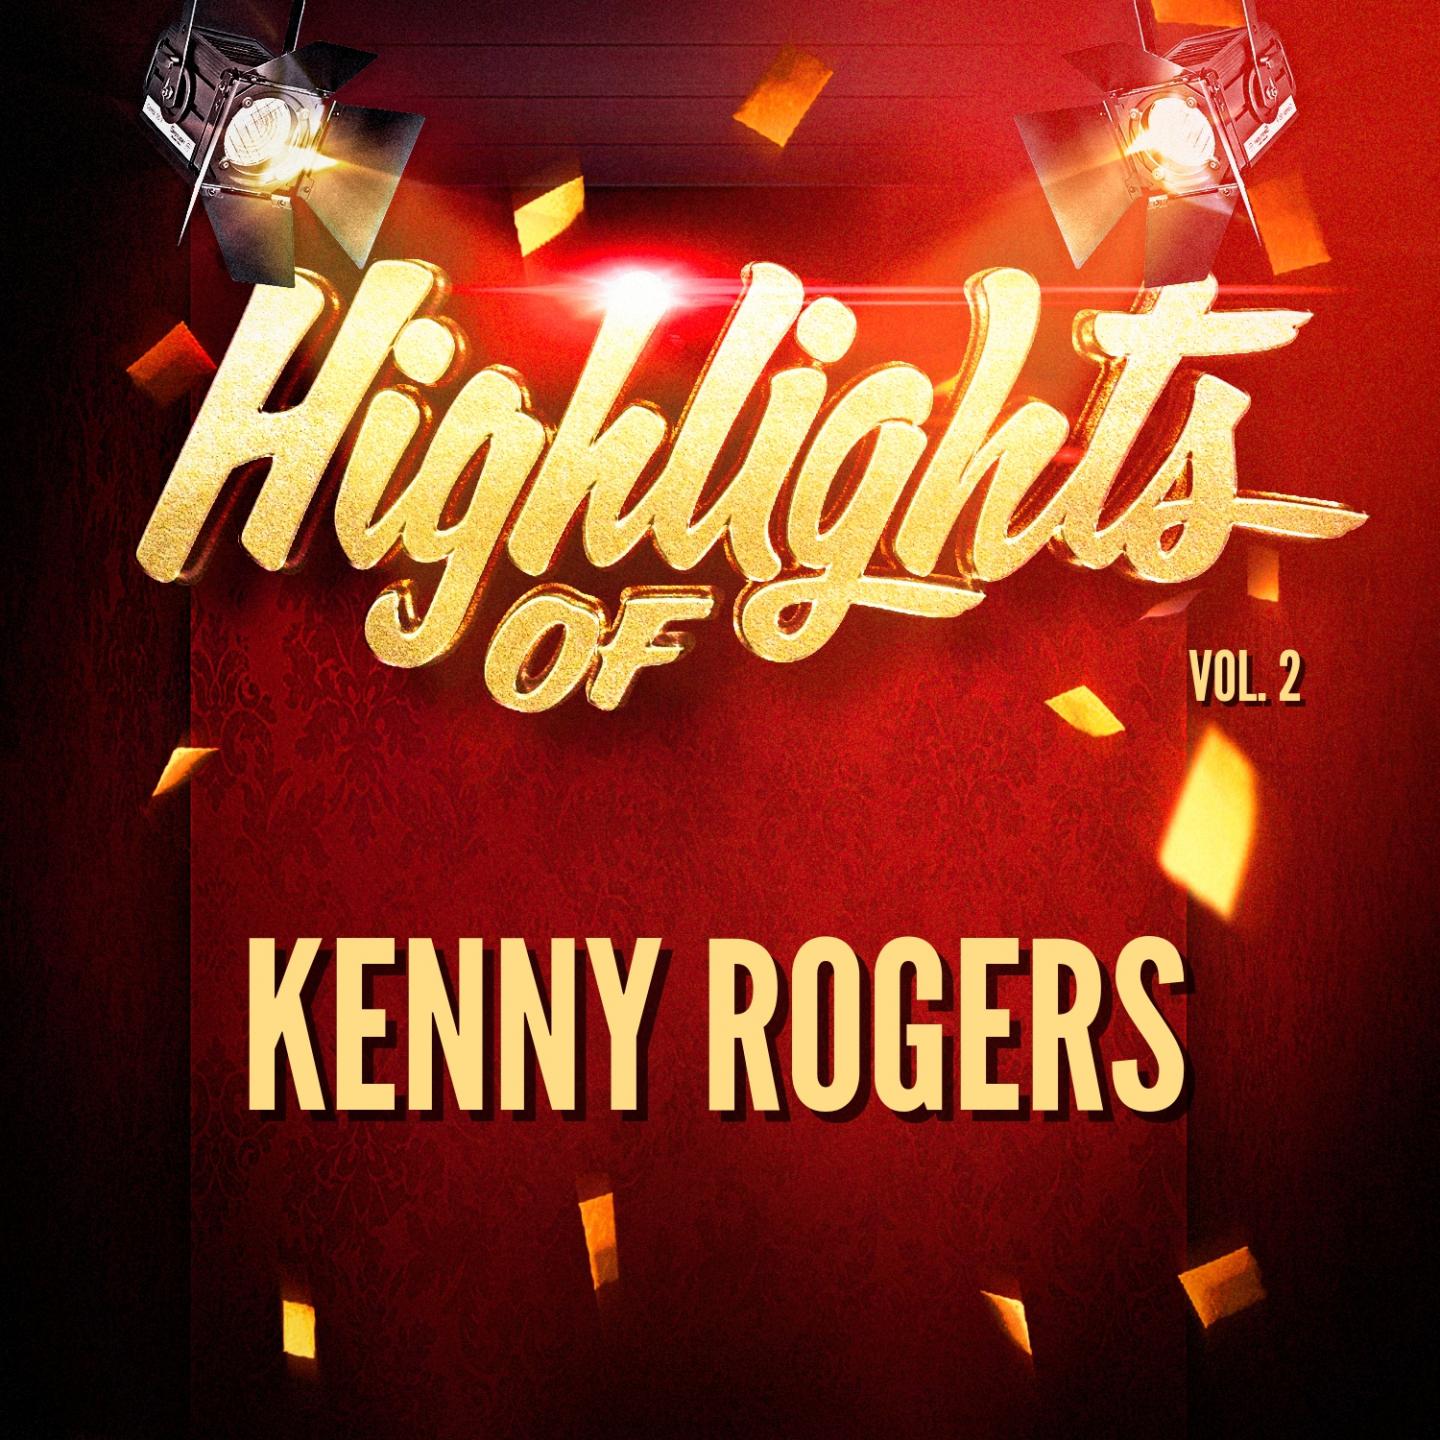 Highlights of Kenny Rogers, Vol. 2